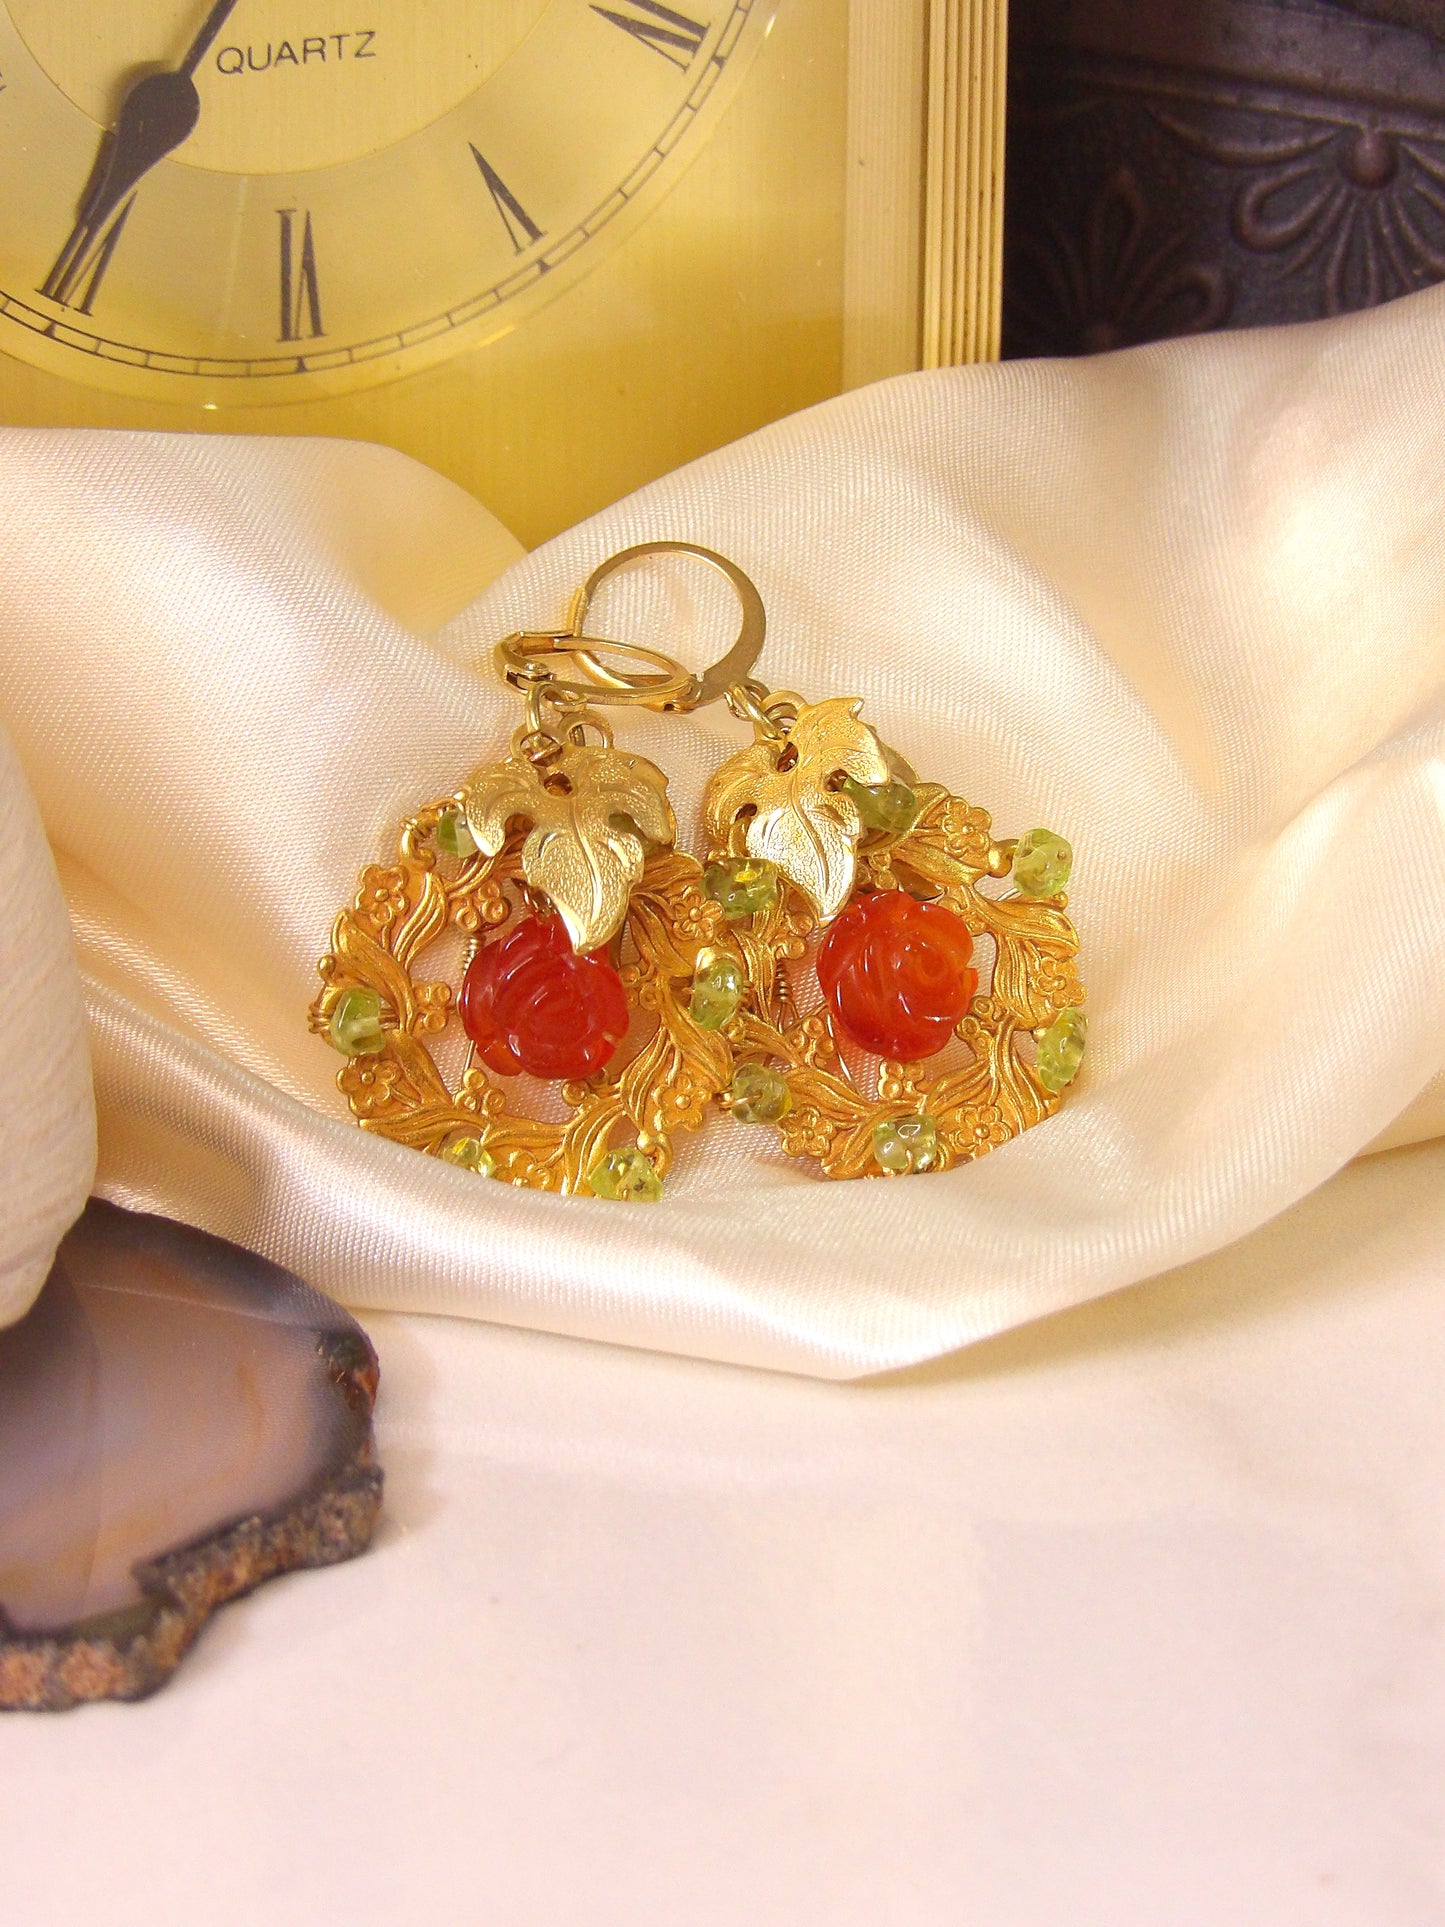 Red Agate Rose Earrings With Peridot Accents | Victorian Gold Plated Wreath Earrings